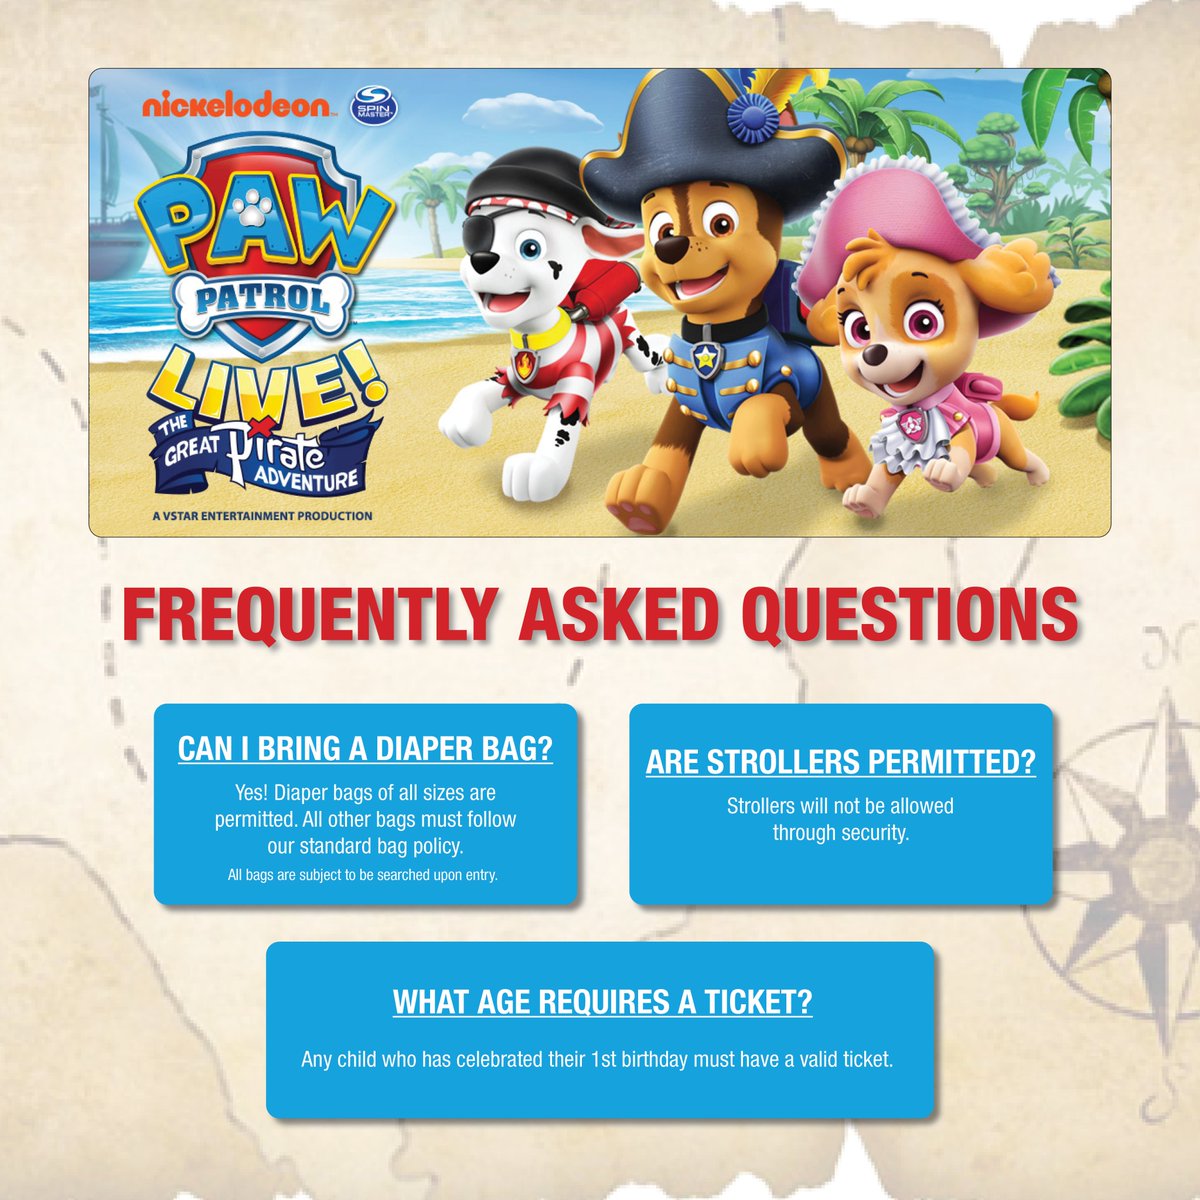 KNOW BEFORE YOU GO PAW Patrol Live! The Great Pirate Adventure will be in the Peoria Civic Center Theater on Saturday & Sunday! Here are some important reminders before you go to the show. More details at bit.ly/PCCKnowBeforeY…